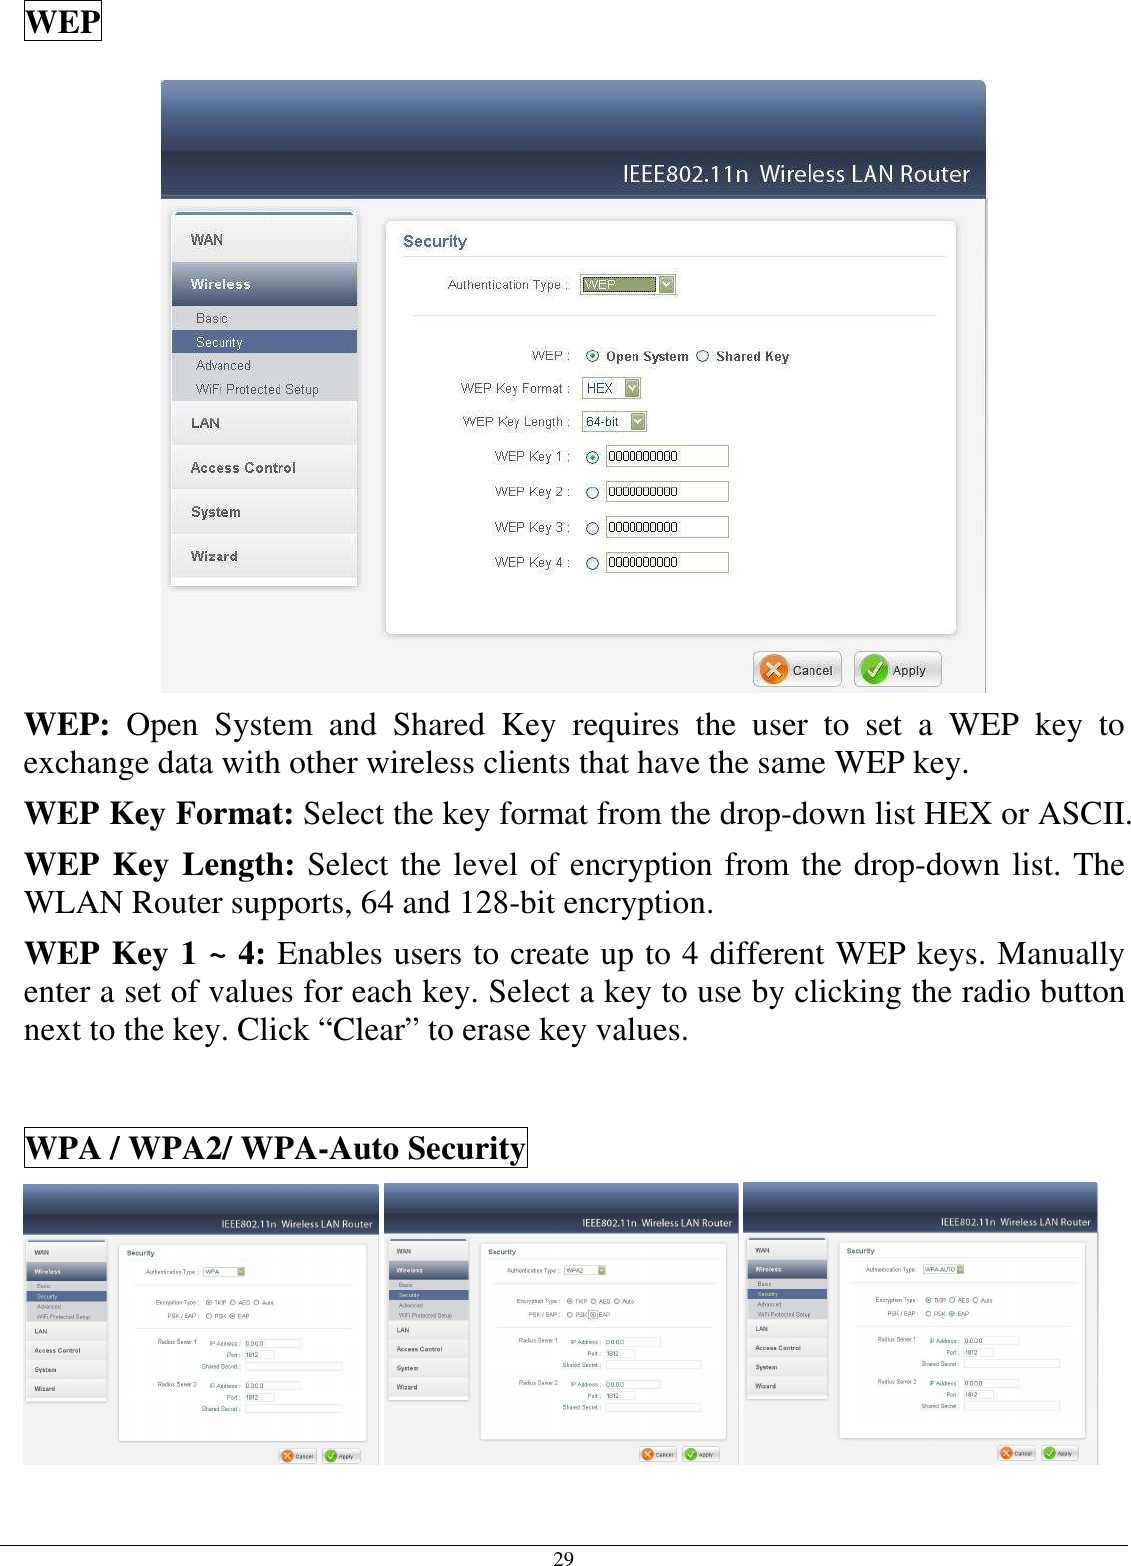 29 WEP  WEP:  Open  System  and  Shared  Key  requires  the  user  to  set  a  WEP  key  to exchange data with other wireless clients that have the same WEP key. WEP Key Format: Select the key format from the drop-down list HEX or ASCII. WEP Key Length: Select the level of encryption from the drop-down list. The WLAN Router supports, 64 and 128-bit encryption. WEP Key 1 ~ 4: Enables users to create up to 4 different WEP keys. Manually enter a set of values for each key. Select a key to use by clicking the radio button next to the key. Click “Clear” to erase key values.  WPA / WPA2/ WPA-Auto Security       